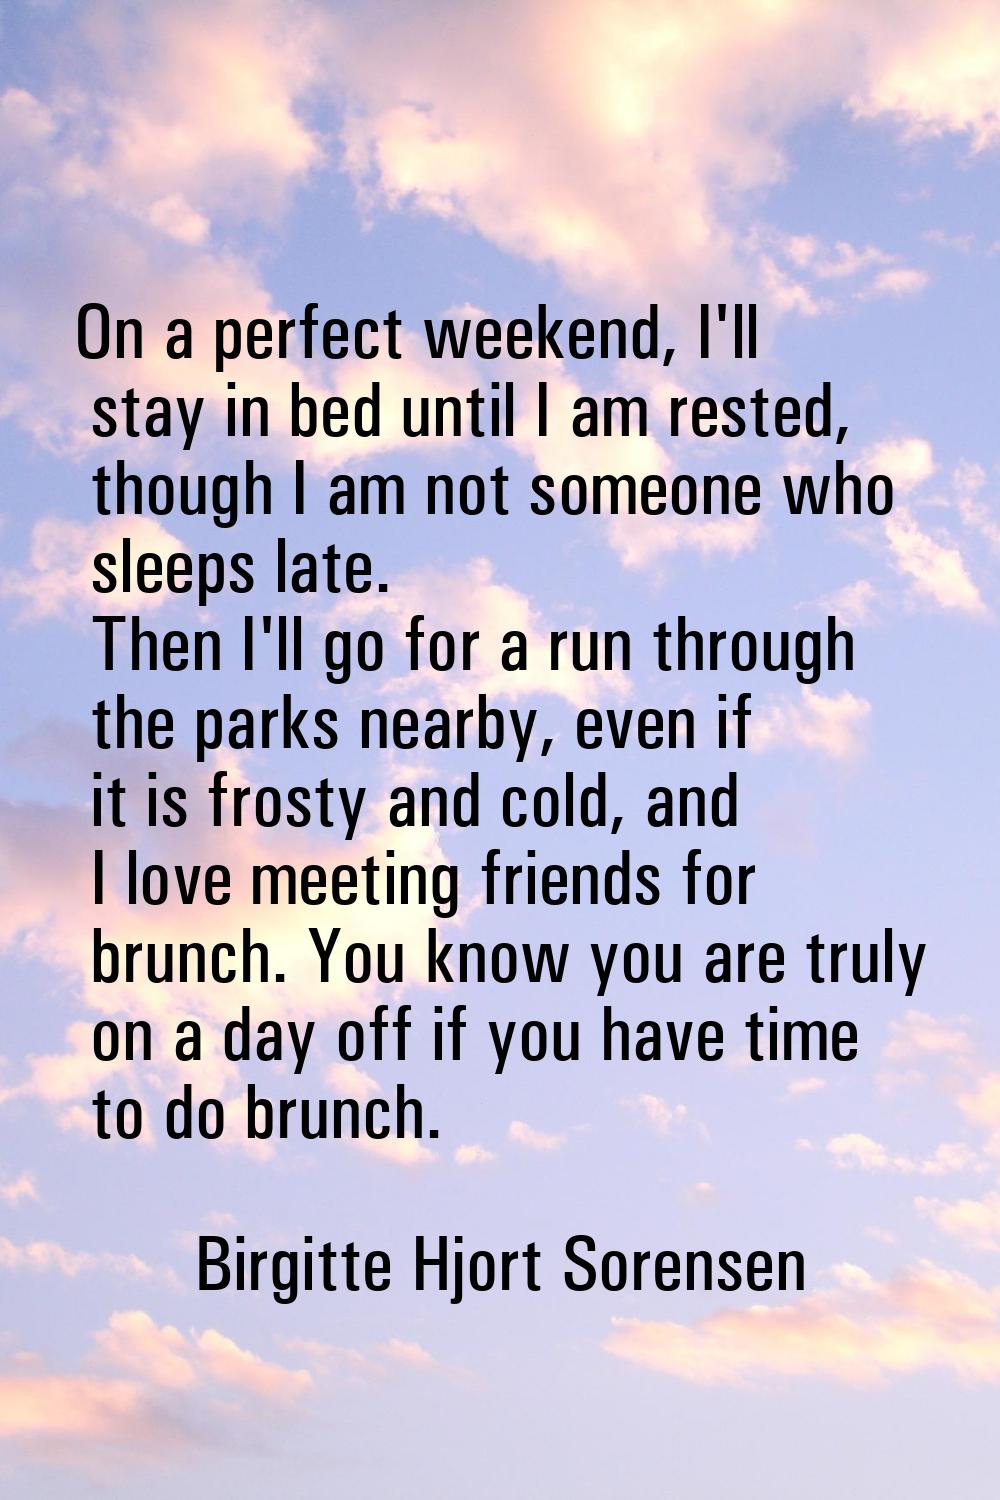 On a perfect weekend, I'll stay in bed until I am rested, though I am not someone who sleeps late. 